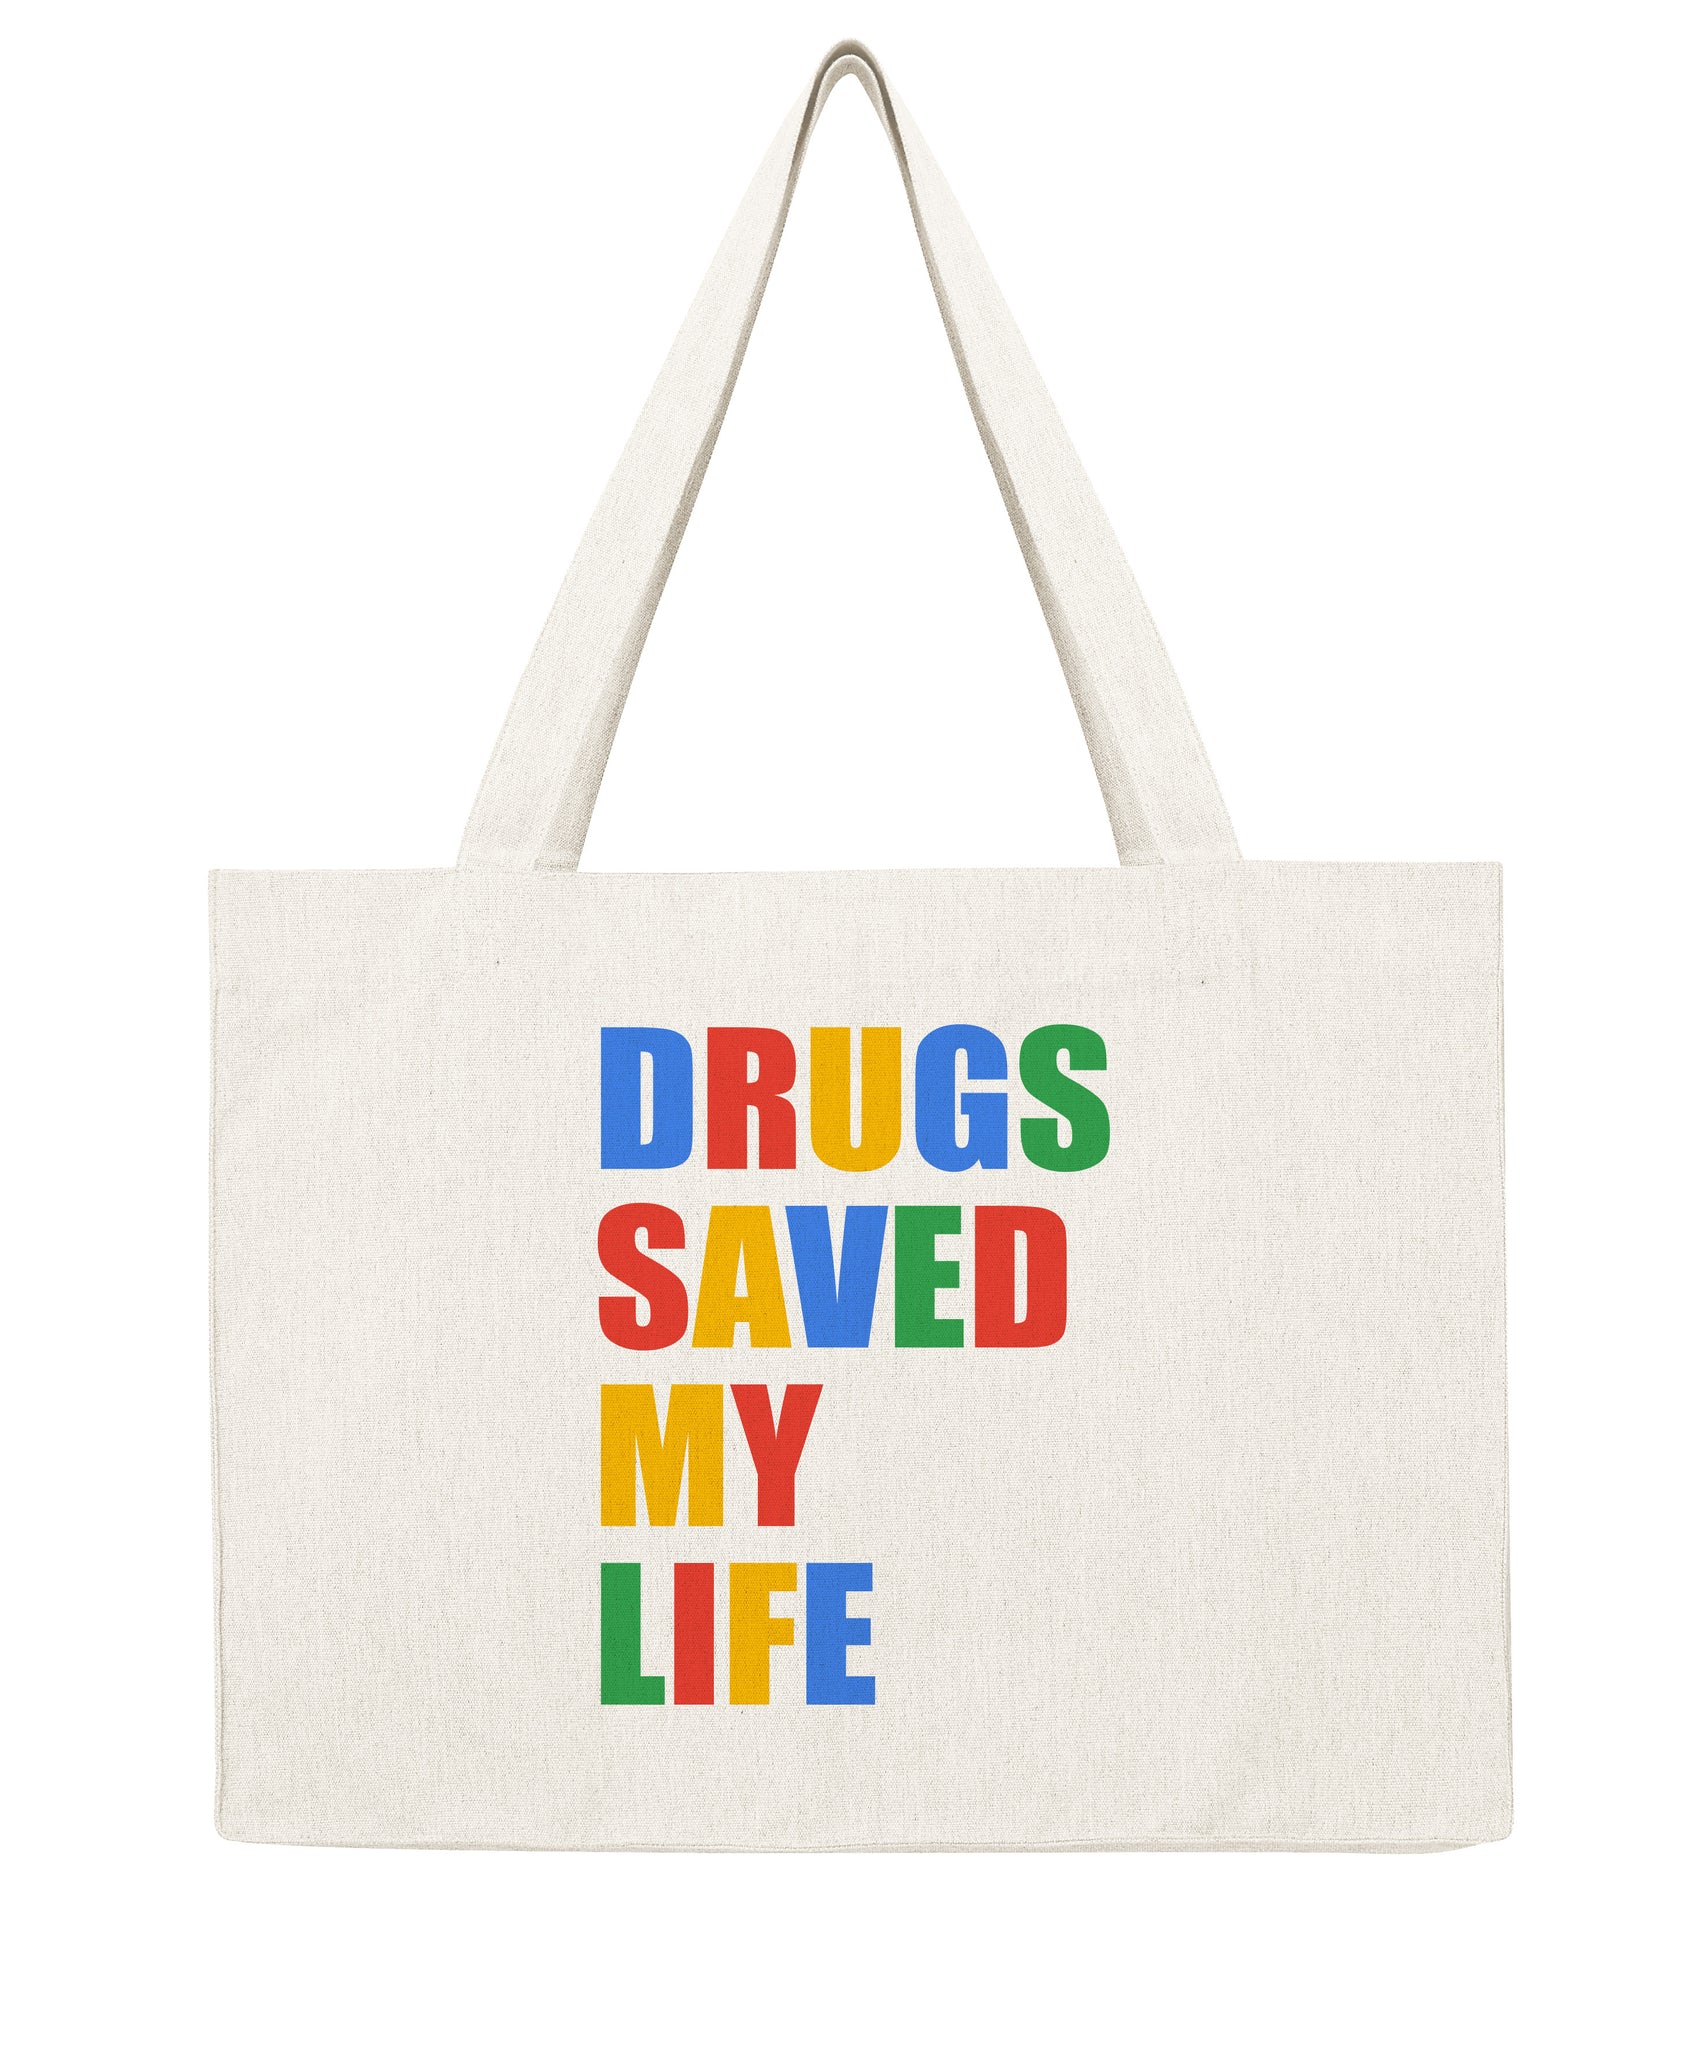 Drugs saved my life - Shopping bag-Sacs-Atelier Amelot